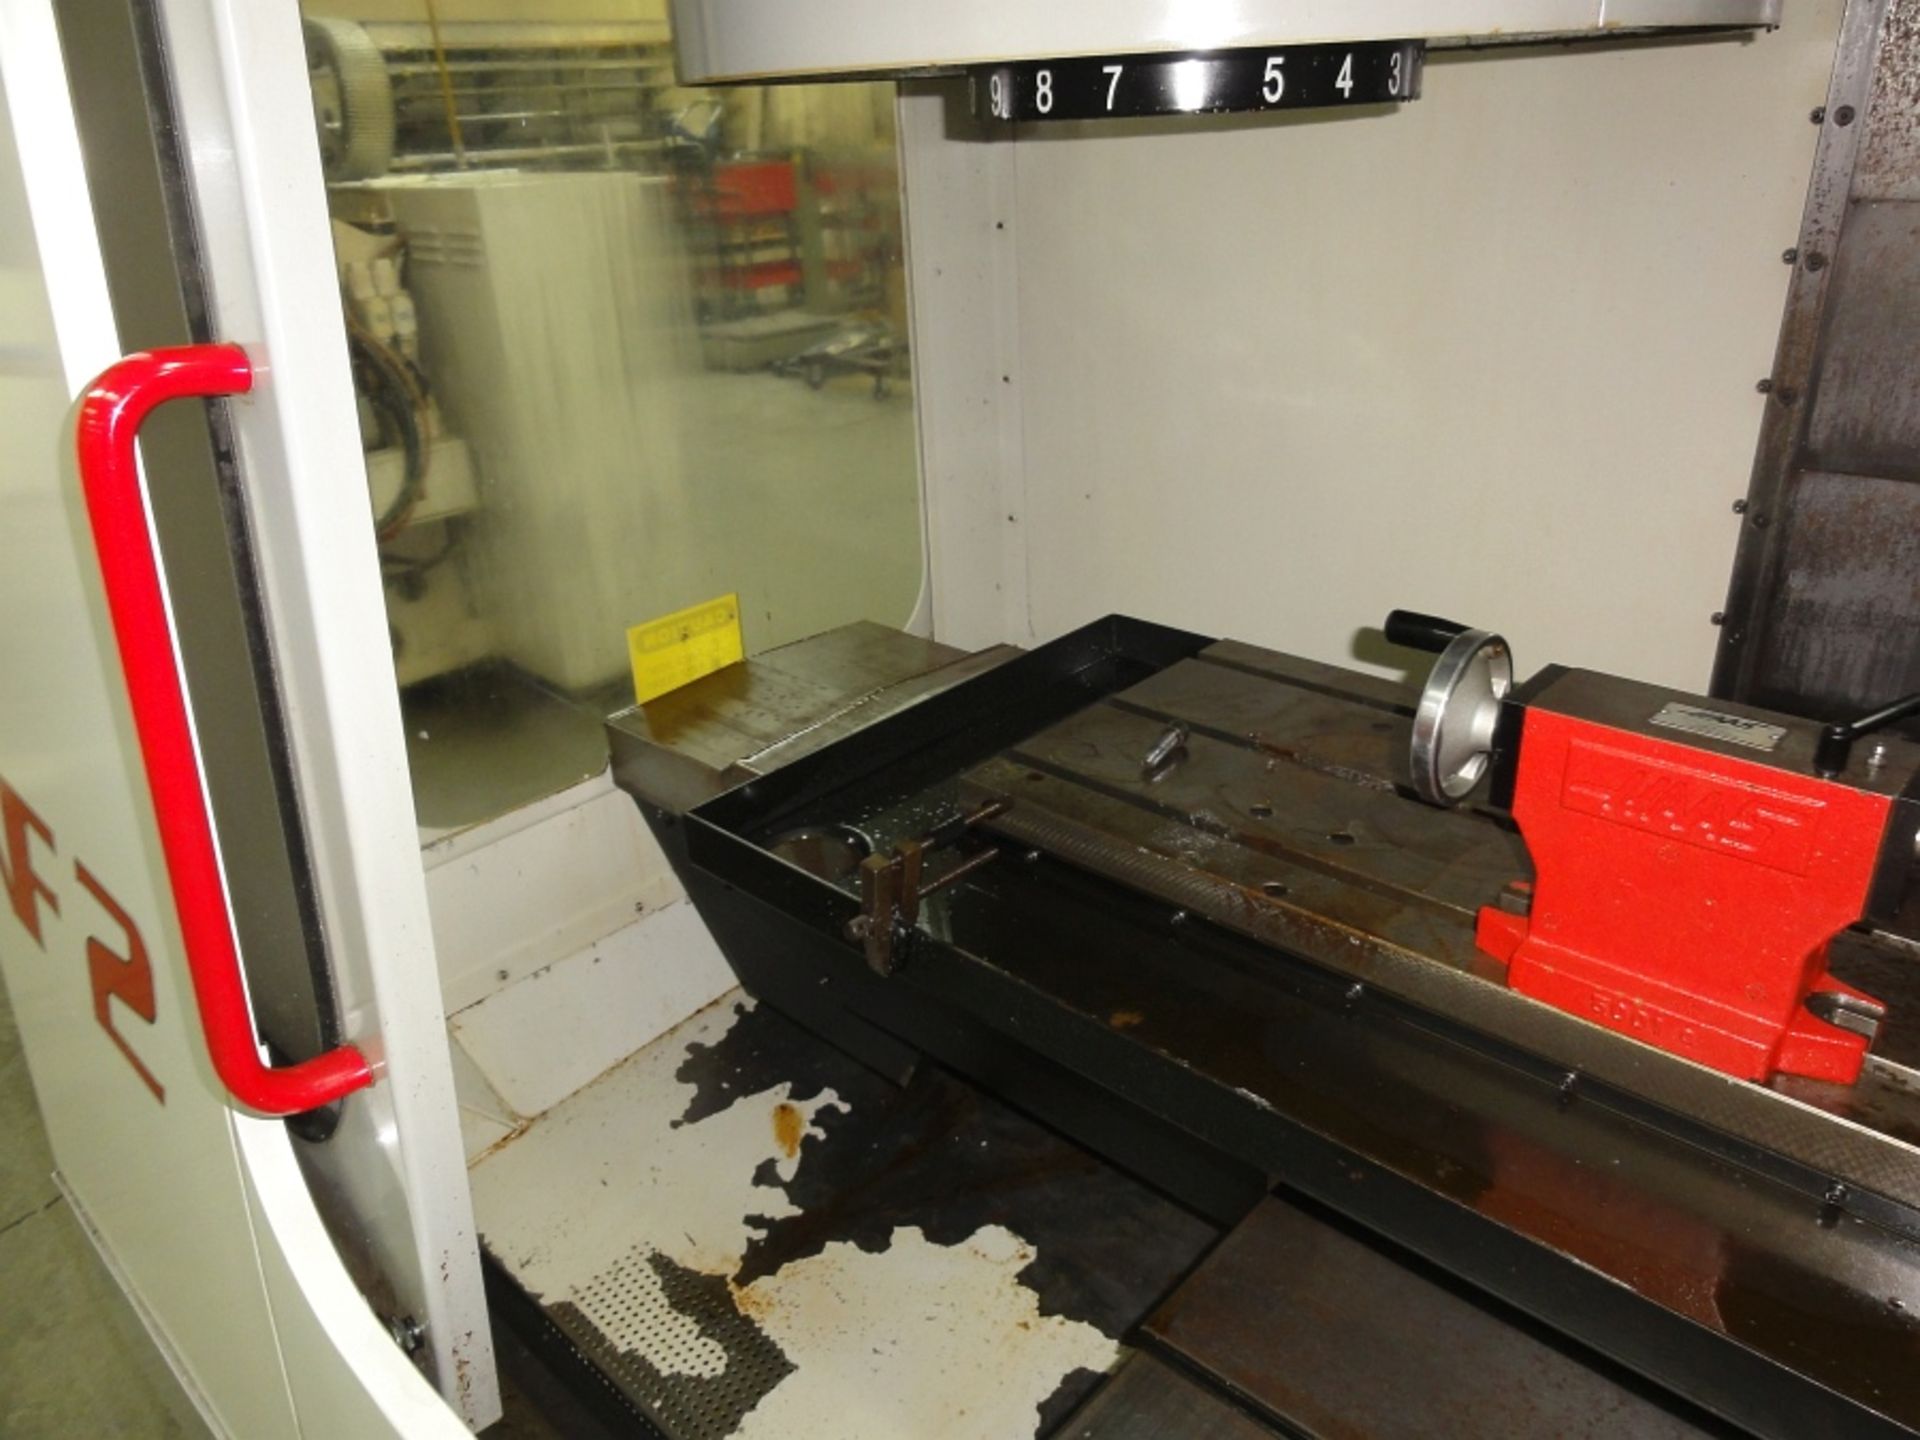 Haas VF2 CNC Milling Machine, 4th Axis Ready 2 HP, SN 18461, 1999, 2723 cut time hrs. - Image 2 of 8